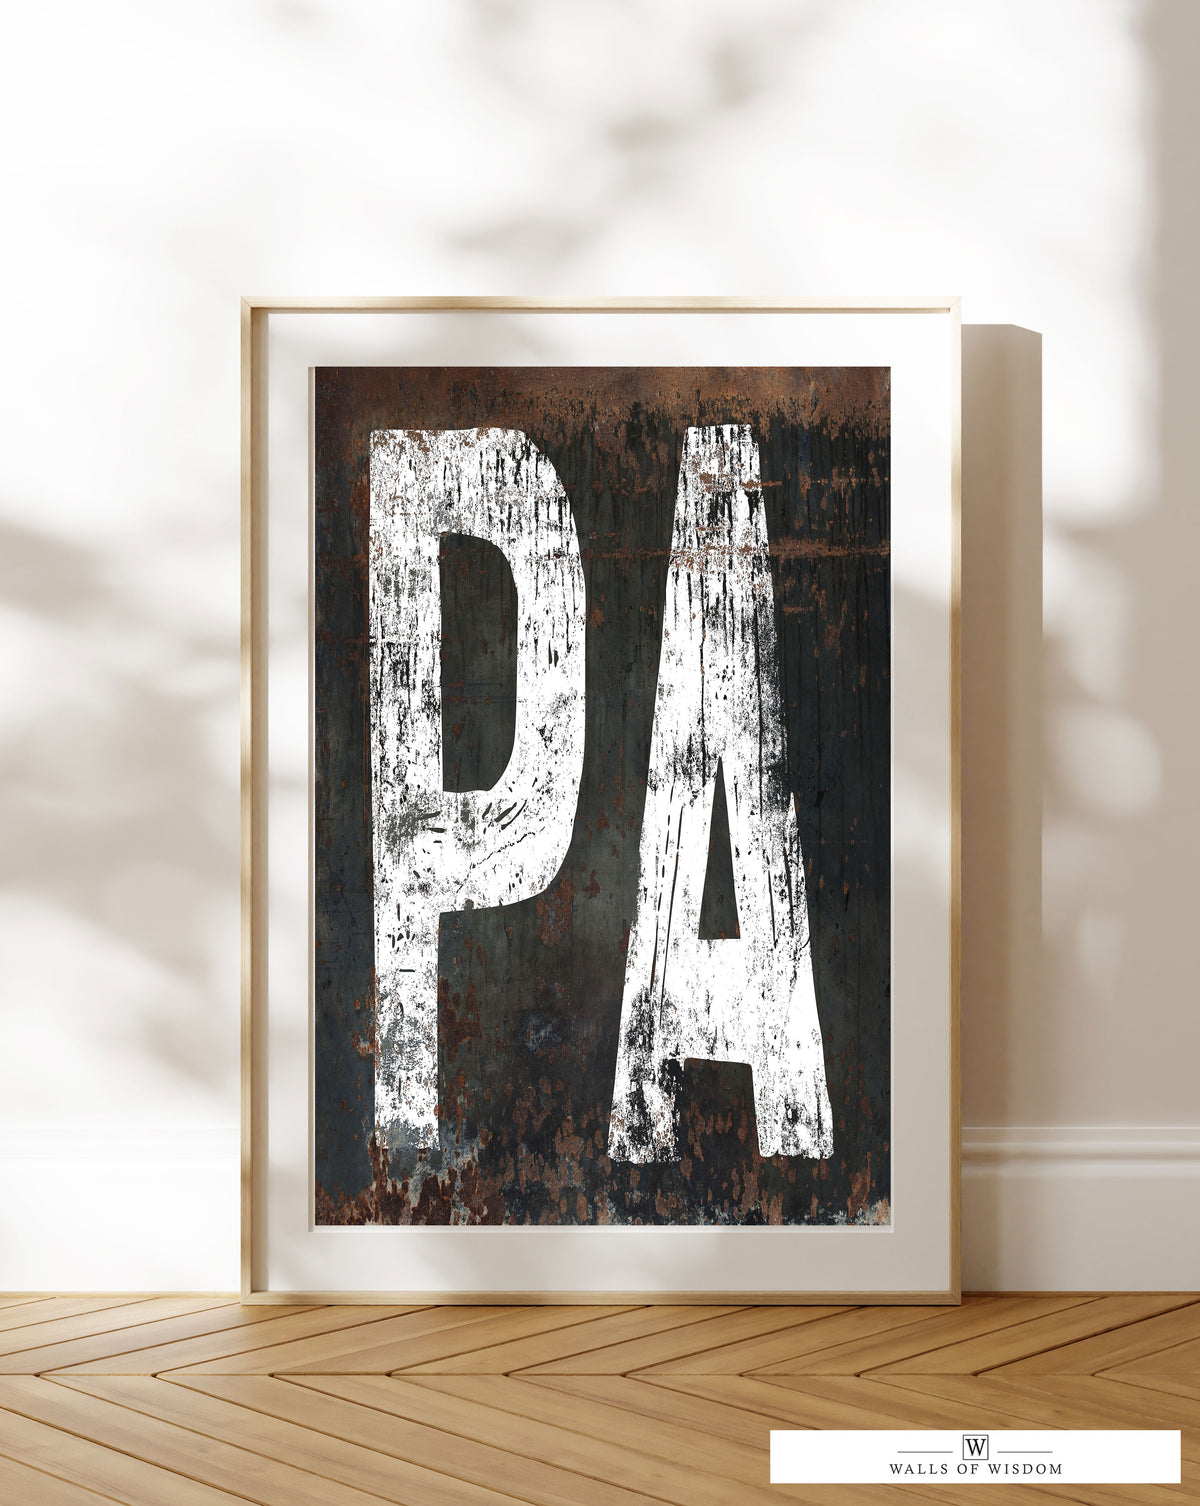 Pennsylvania Home State Typographic Western Poster  - PA State Sign Southwest Print Wall Art